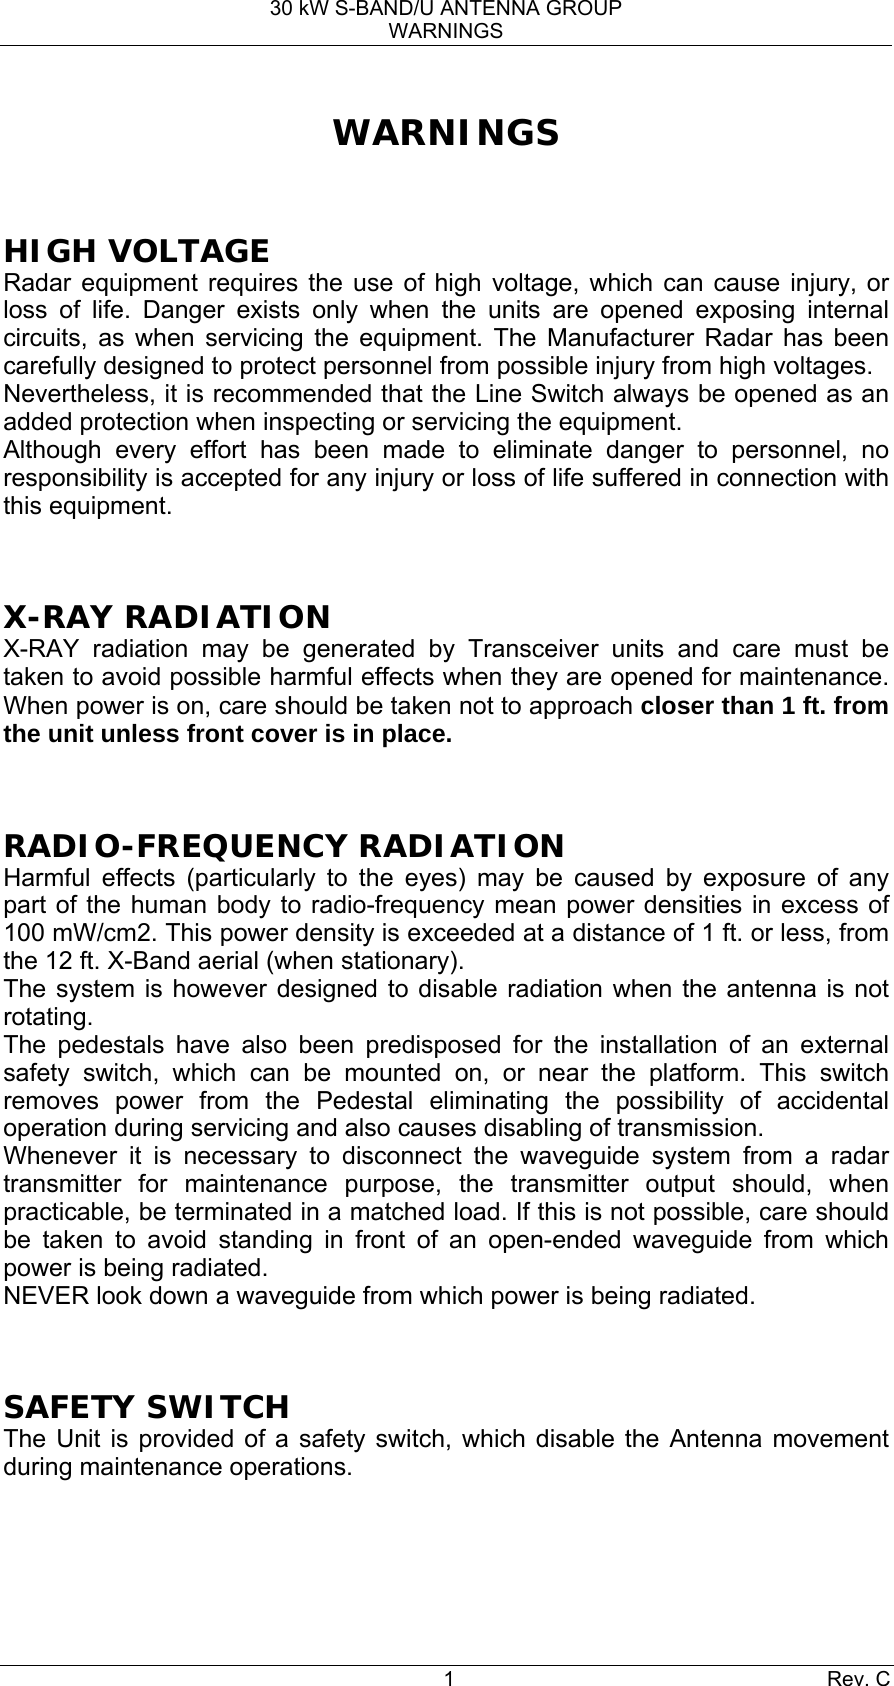 30 kW S-BAND/U ANTENNA GROUP WARNINGS 1 Rev. C WARNINGS  HIGH VOLTAGE Radar equipment requires the use of high voltage, which can cause injury, or loss of life. Danger exists only when the units are opened exposing internal circuits, as when servicing the equipment. The Manufacturer Radar has been carefully designed to protect personnel from possible injury from high voltages. Nevertheless, it is recommended that the Line Switch always be opened as an added protection when inspecting or servicing the equipment. Although every effort has been made to eliminate danger to personnel, no responsibility is accepted for any injury or loss of life suffered in connection with this equipment.  X-RAY RADIATION X-RAY radiation may be generated by Transceiver units and care must be taken to avoid possible harmful effects when they are opened for maintenance. When power is on, care should be taken not to approach closer than 1 ft. from the unit unless front cover is in place.  RADIO-FREQUENCY RADIATION Harmful effects (particularly to the eyes) may be caused by exposure of any part of the human body to radio-frequency mean power densities in excess of 100 mW/cm2. This power density is exceeded at a distance of 1 ft. or less, from the 12 ft. X-Band aerial (when stationary). The system is however designed to disable radiation when the antenna is not rotating. The pedestals have also been predisposed for the installation of an external safety switch, which can be mounted on, or near the platform. This switch removes power from the Pedestal eliminating the possibility of accidental operation during servicing and also causes disabling of transmission. Whenever it is necessary to disconnect the waveguide system from a radar transmitter for maintenance purpose, the transmitter output should, when practicable, be terminated in a matched load. If this is not possible, care should be taken to avoid standing in front of an open-ended waveguide from which power is being radiated. NEVER look down a waveguide from which power is being radiated.  SAFETY SWITCH The Unit is provided of a safety switch, which disable the Antenna movement during maintenance operations.   